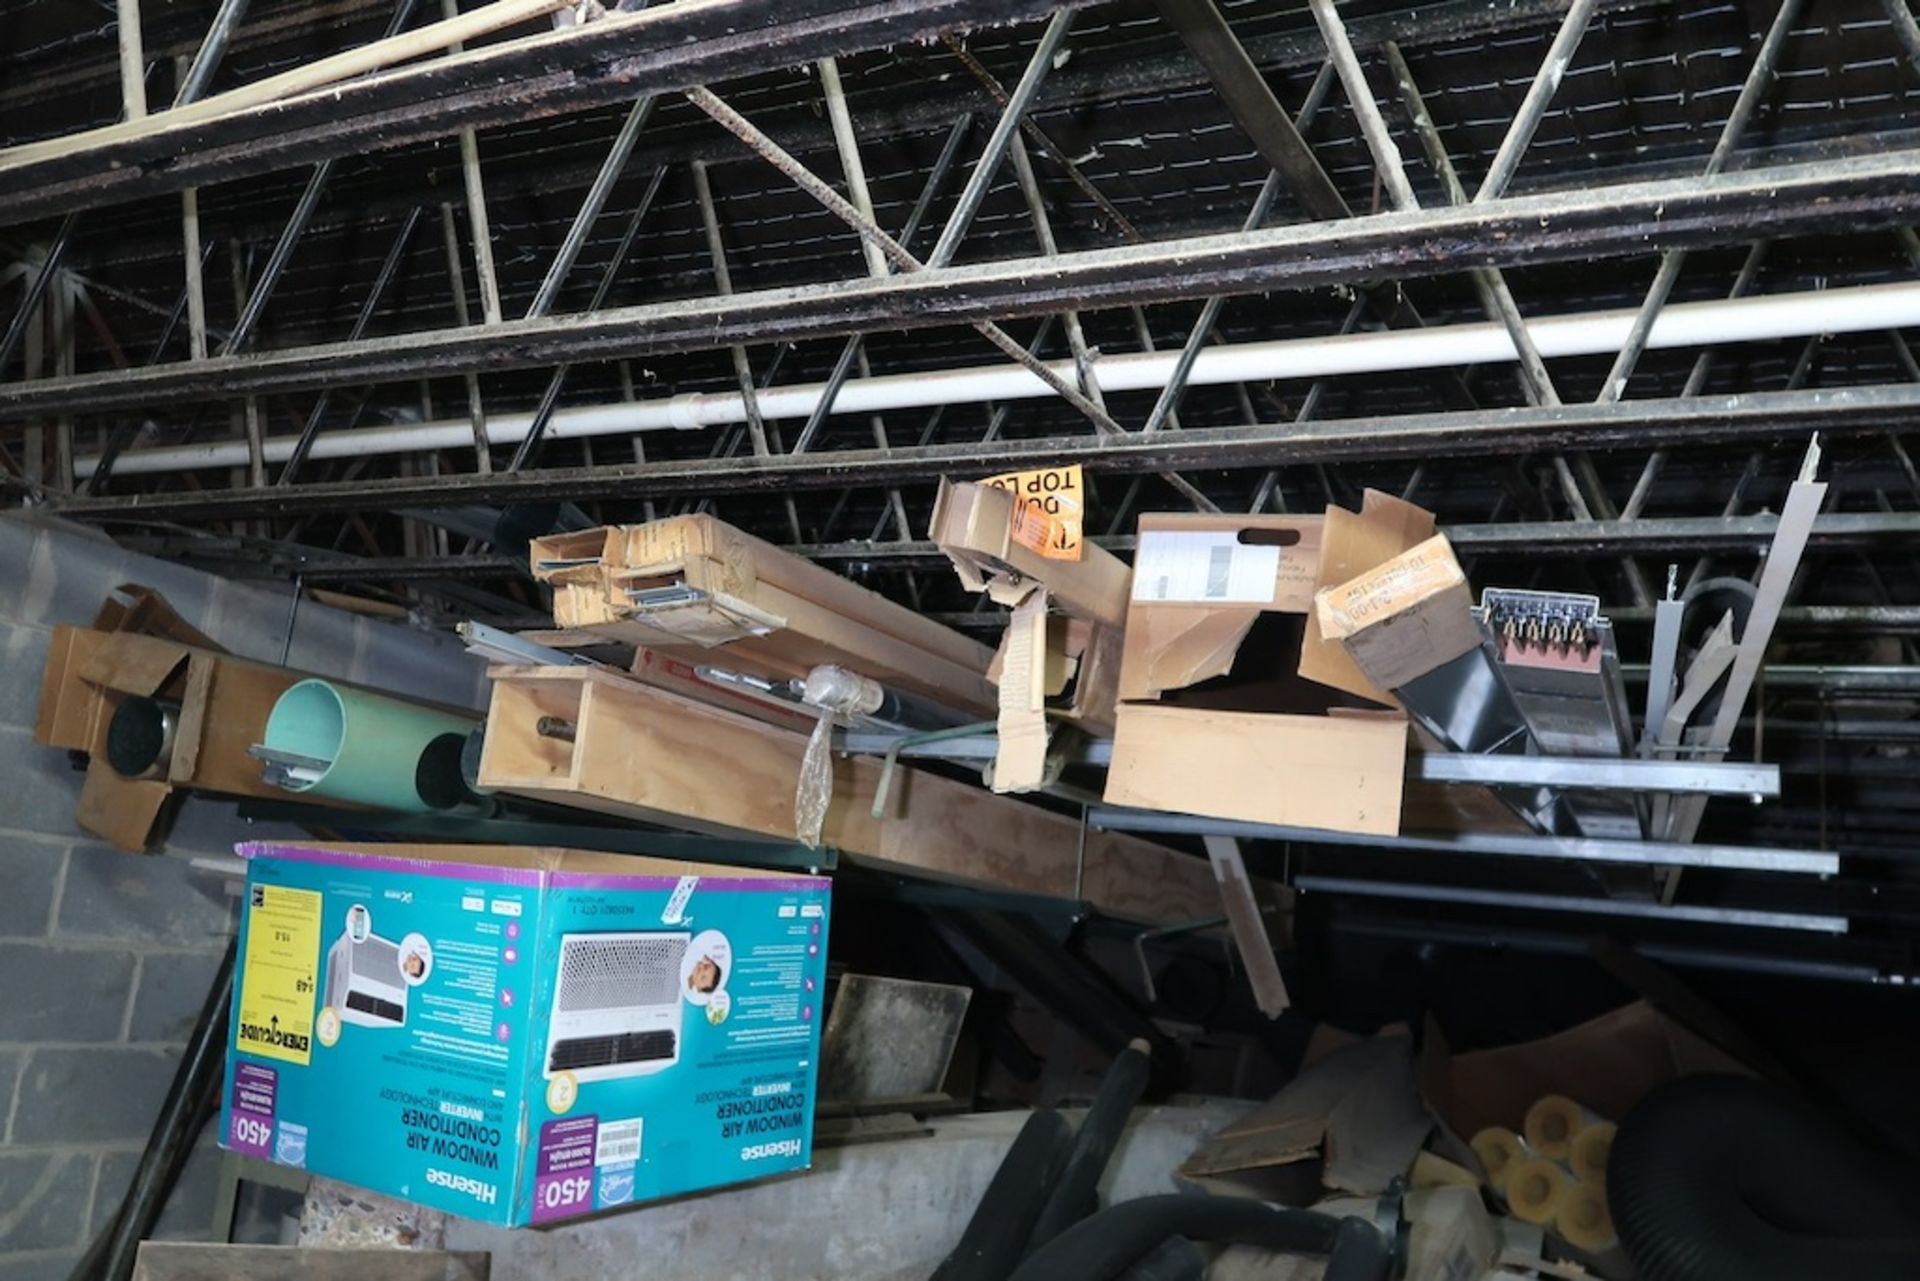 Remaining Contents of Under-Ramp Storage Room, Including Conveyor Parts and Rollers, Etc. - Image 4 of 21